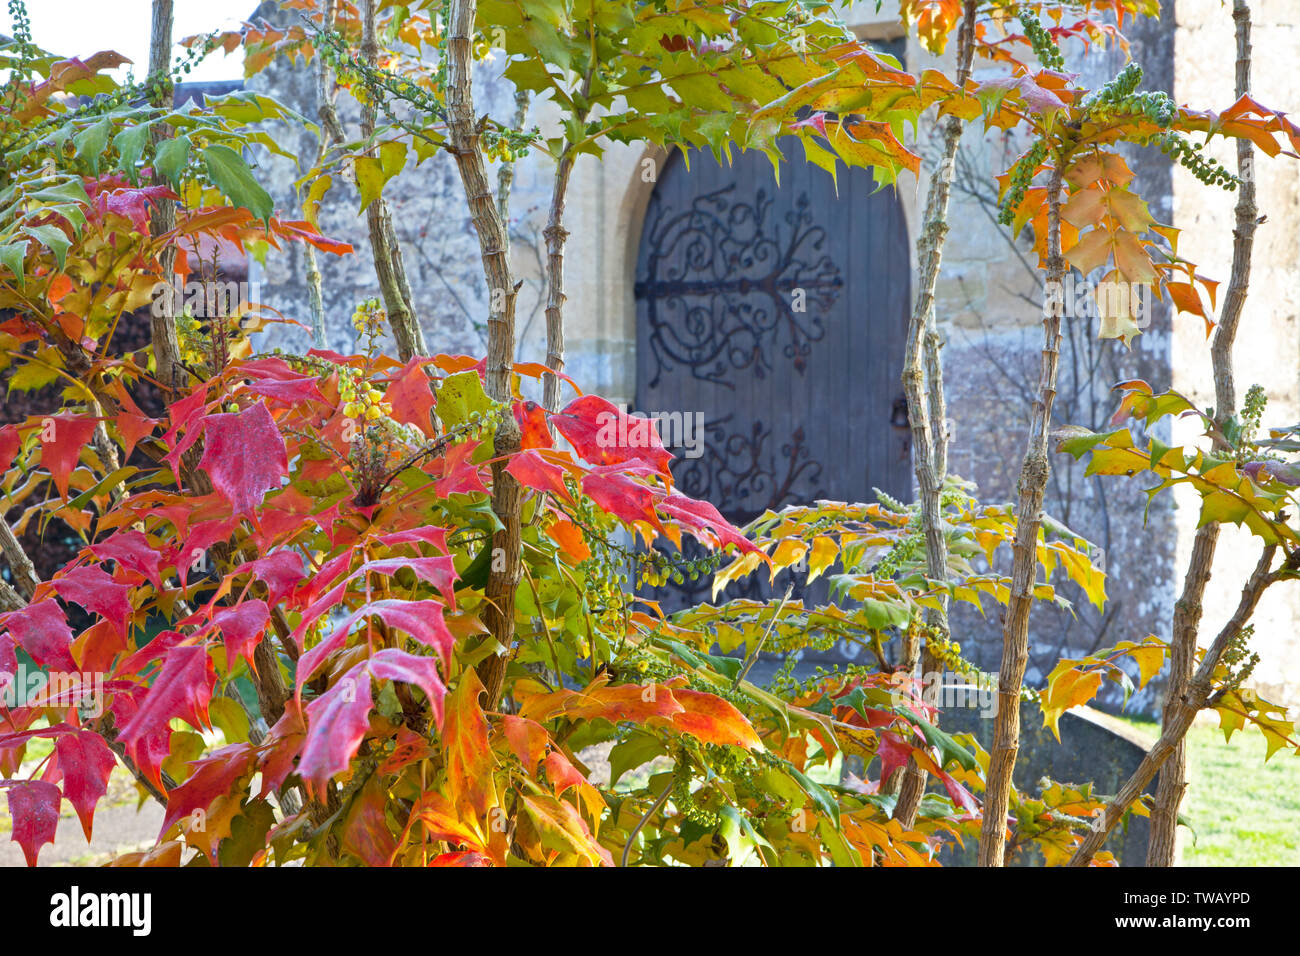 The doorway of St. Aldhelm's Church in the village of Bishopstrow near Warminster in Wiltshire, framed by the leaves of a Mahonia shrub. Stock Photo